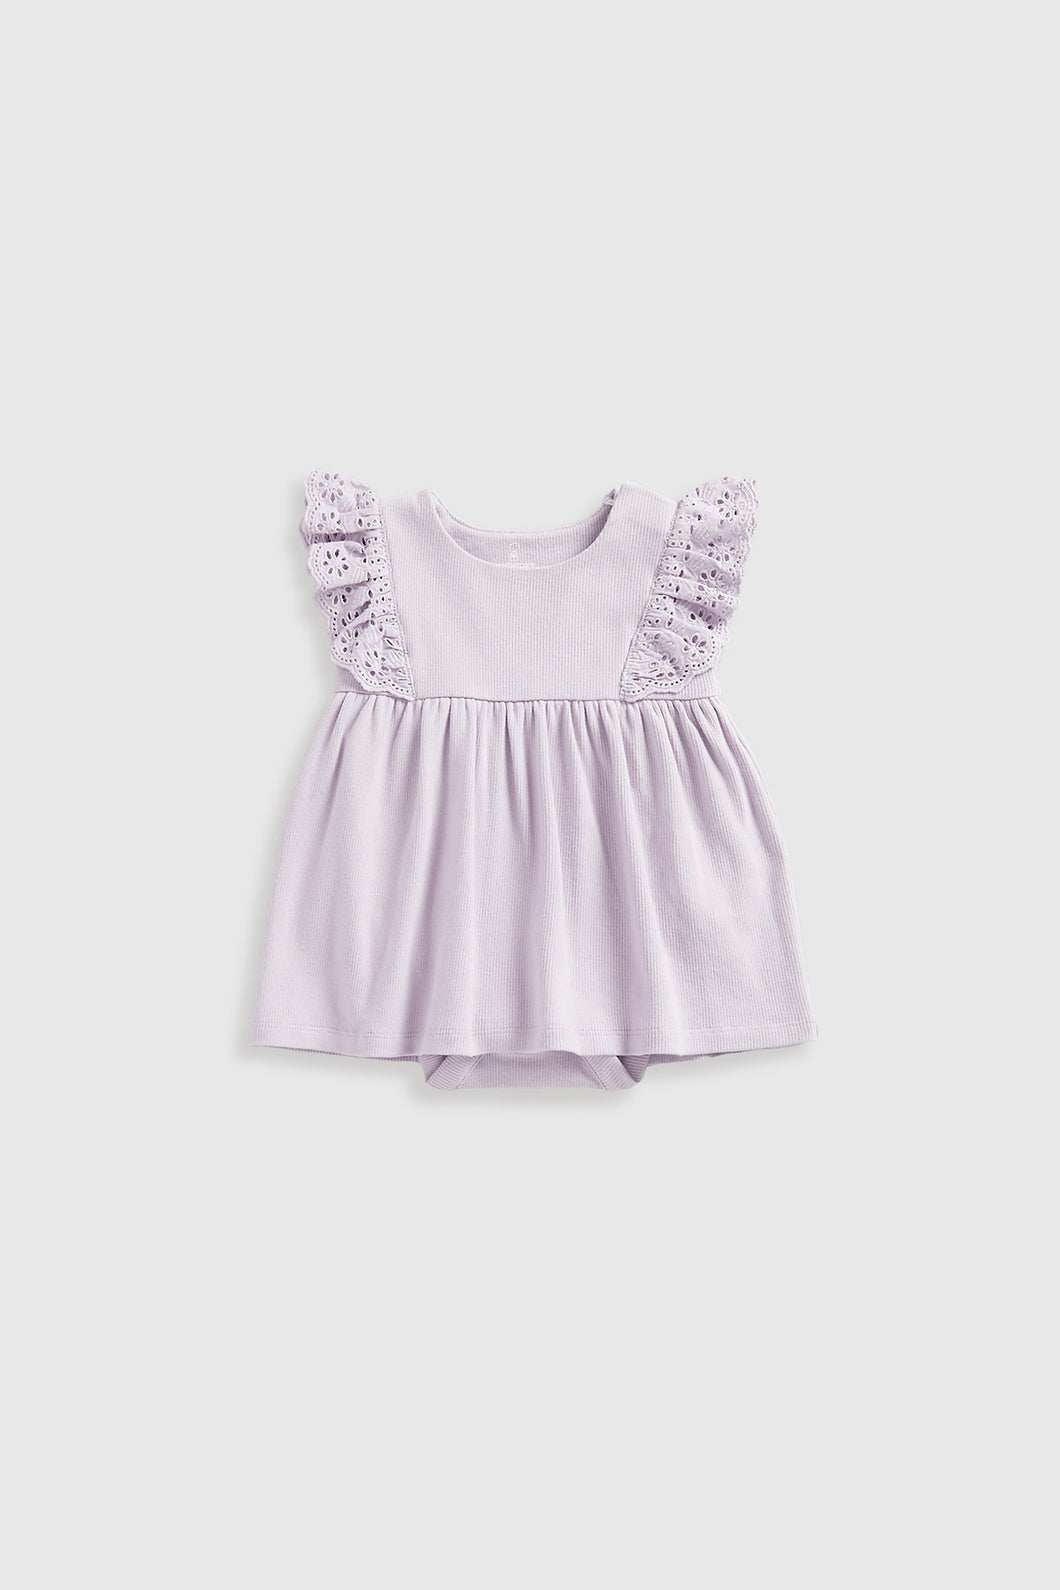 Mothercare Lilac Ribbed Romper Dress